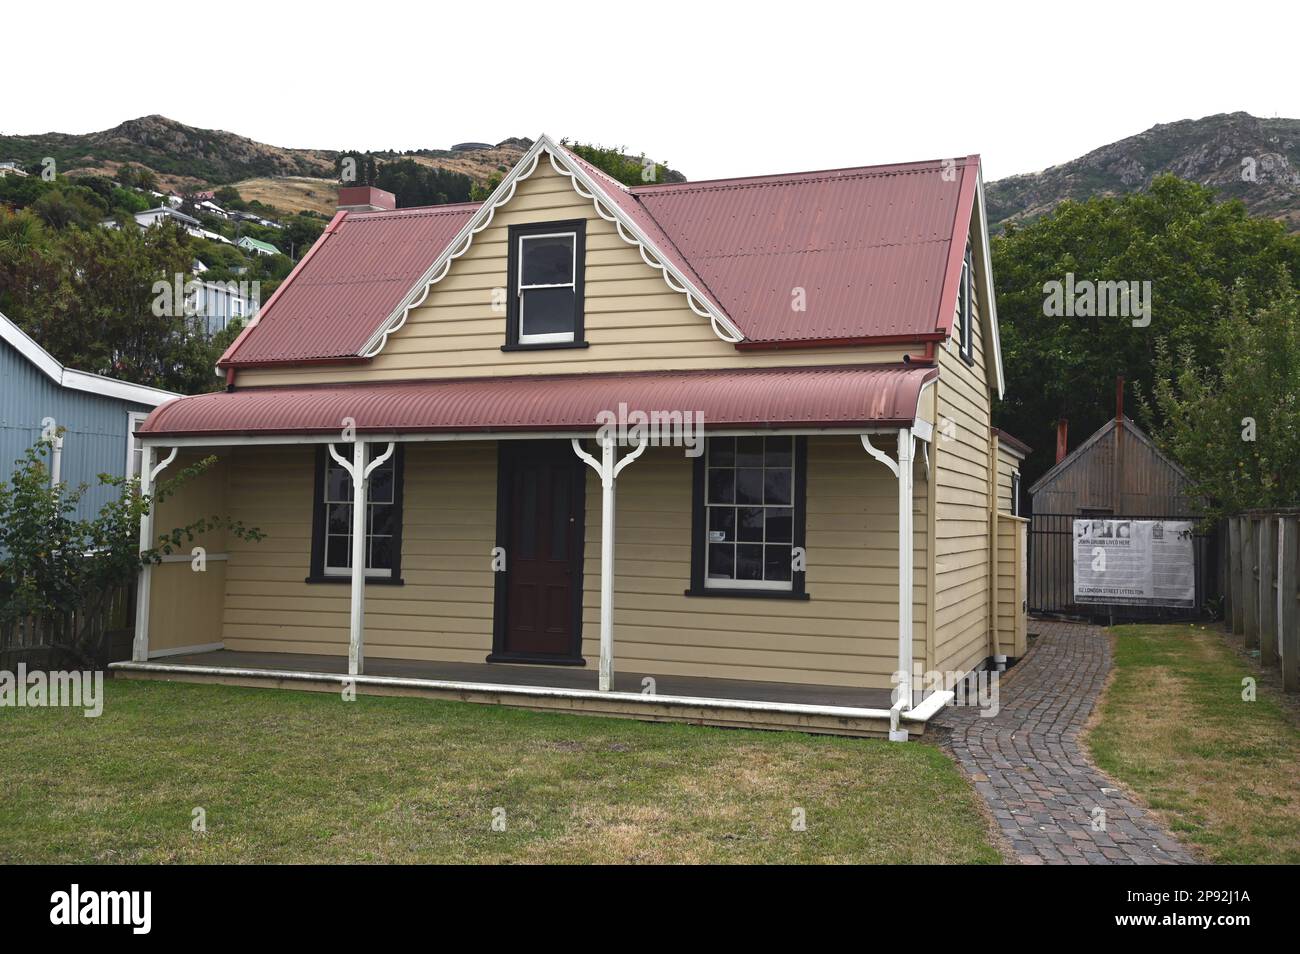 Grubb Cottage, Lyttleton, dates was built in 1851 and is the oldest surviving domestic dwelling in Lyttleton and one of the oldest in Canterbury. Stock Photo